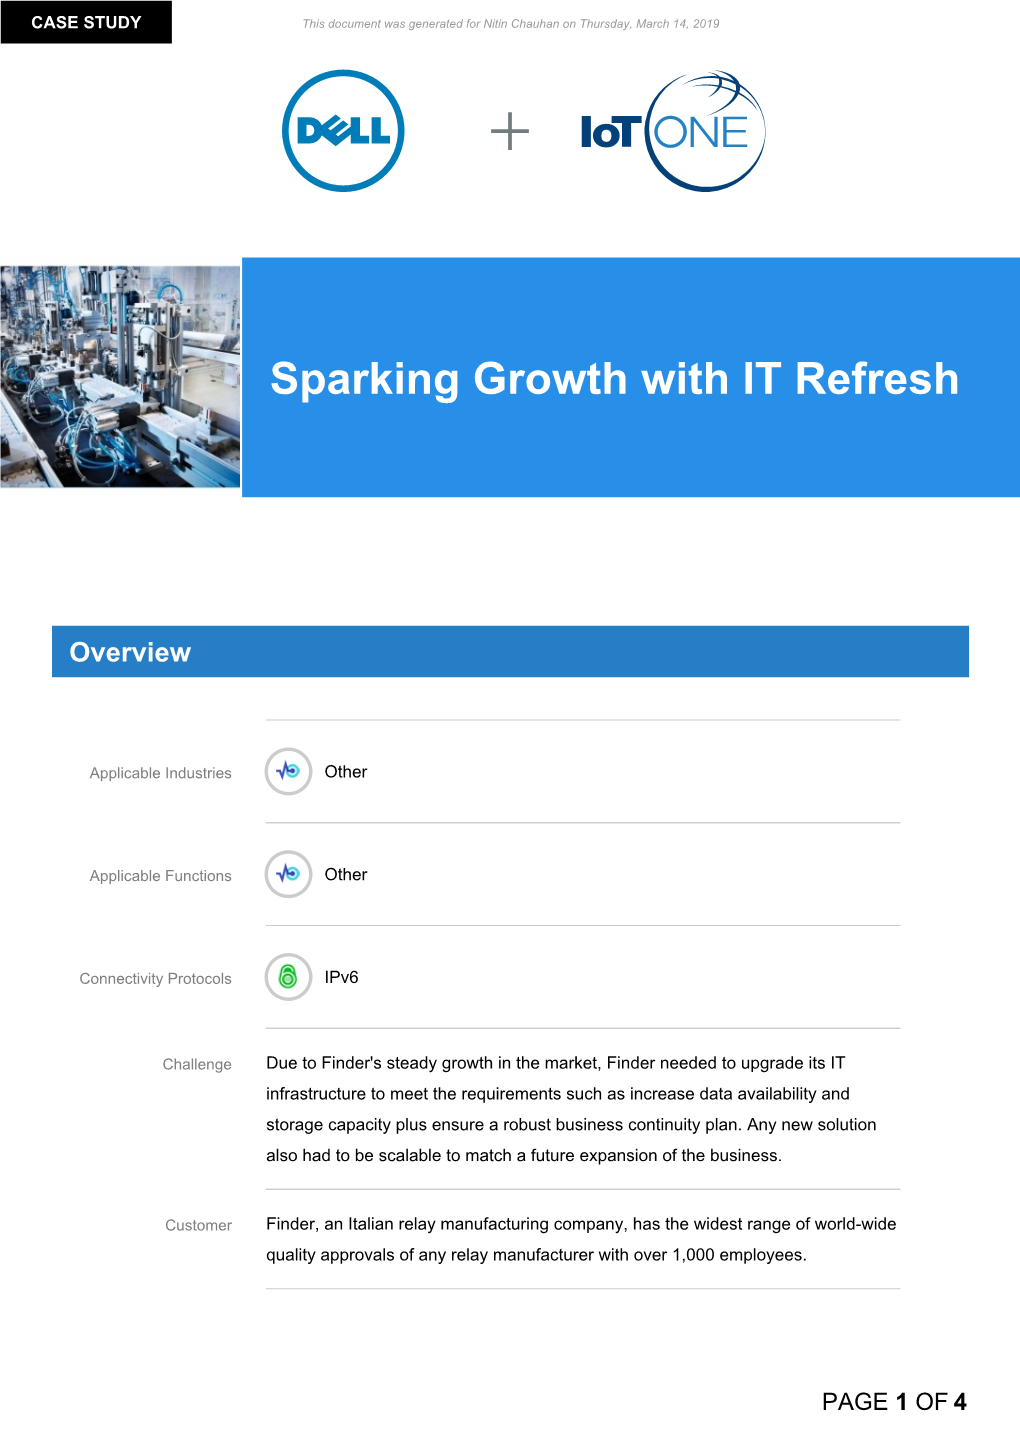 Sparking Growth with IT Refresh